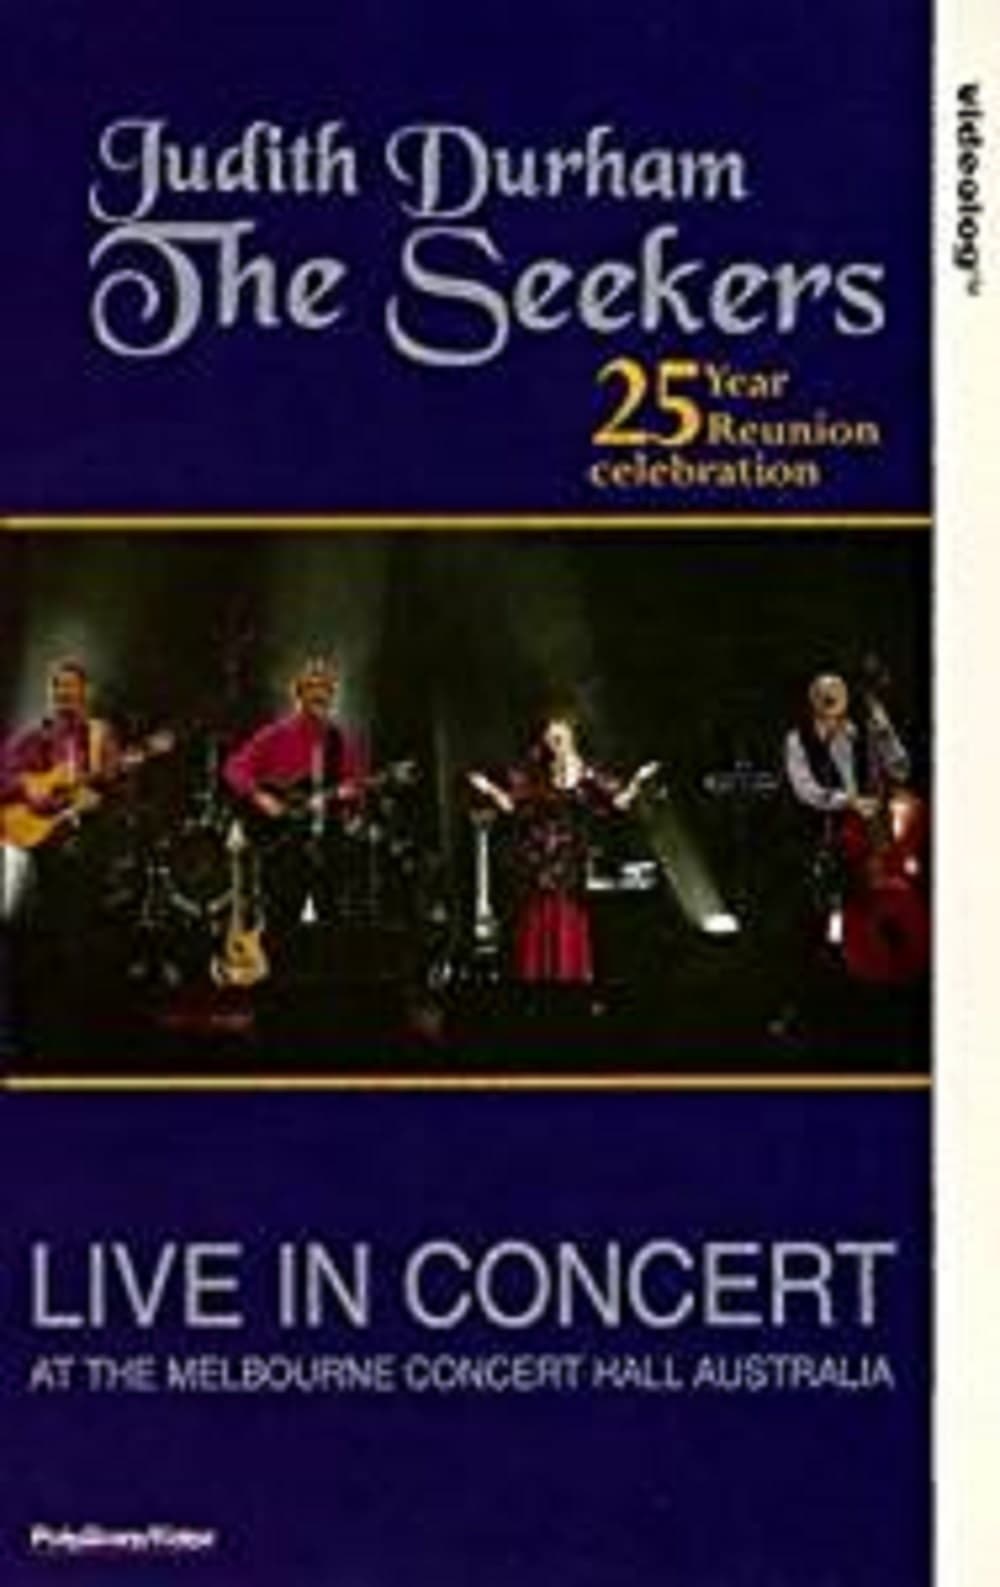 The Seekers 25 Year Reunion